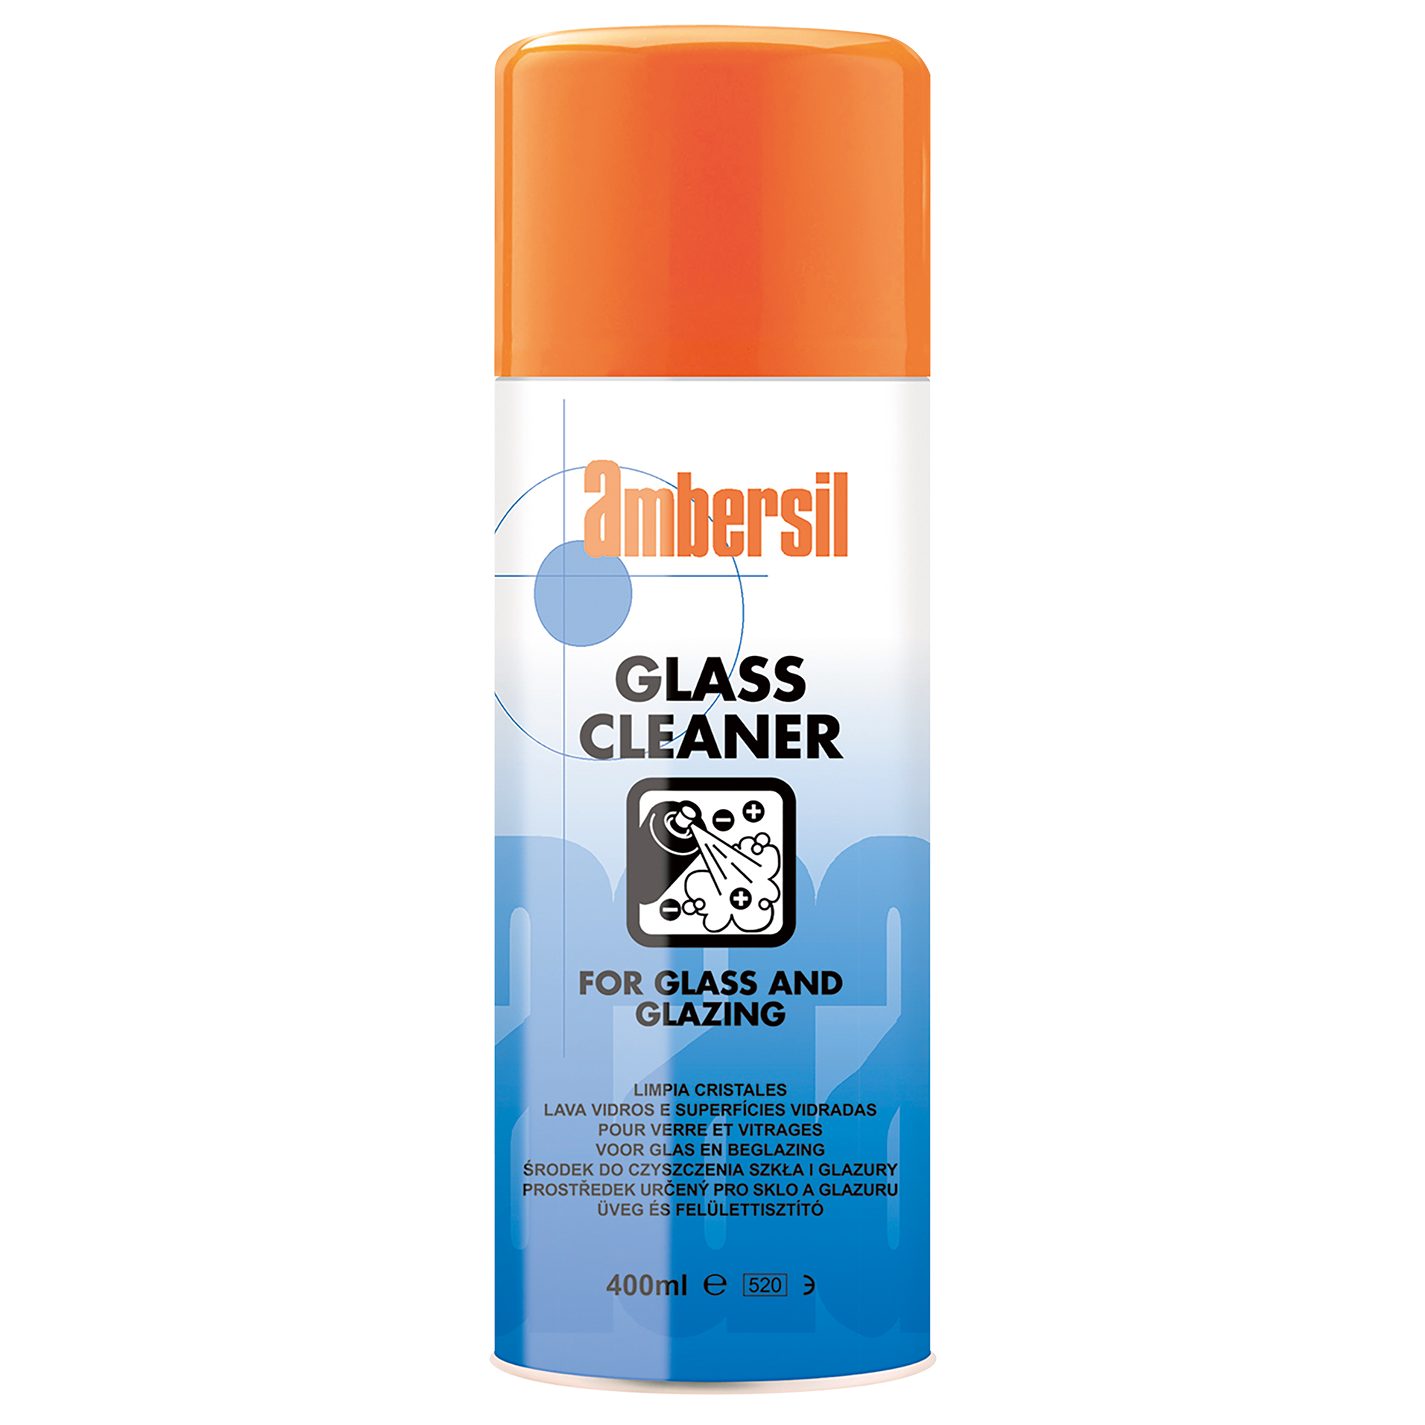 GLASS CLEANER FOR GLASS AND GLAZING 400ML